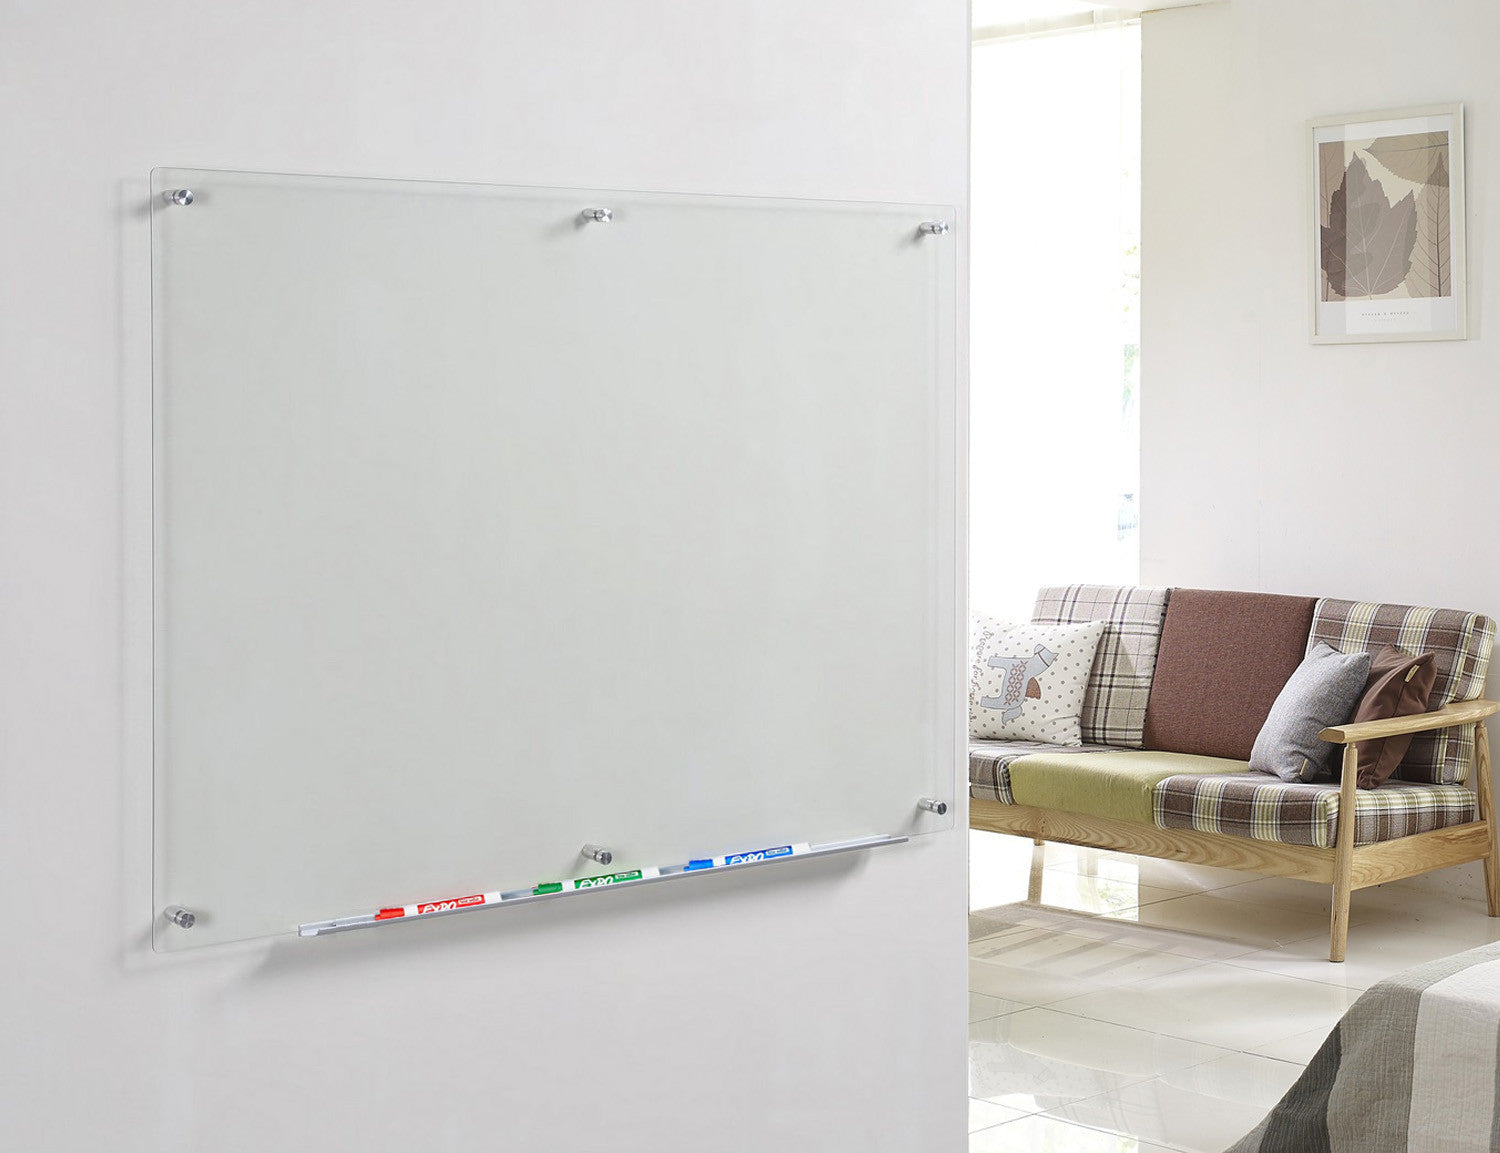 Clear Glass Dry-Erase Board with Aluminum Marker Tray. Wall Mounted in a living room for notes & reminders 